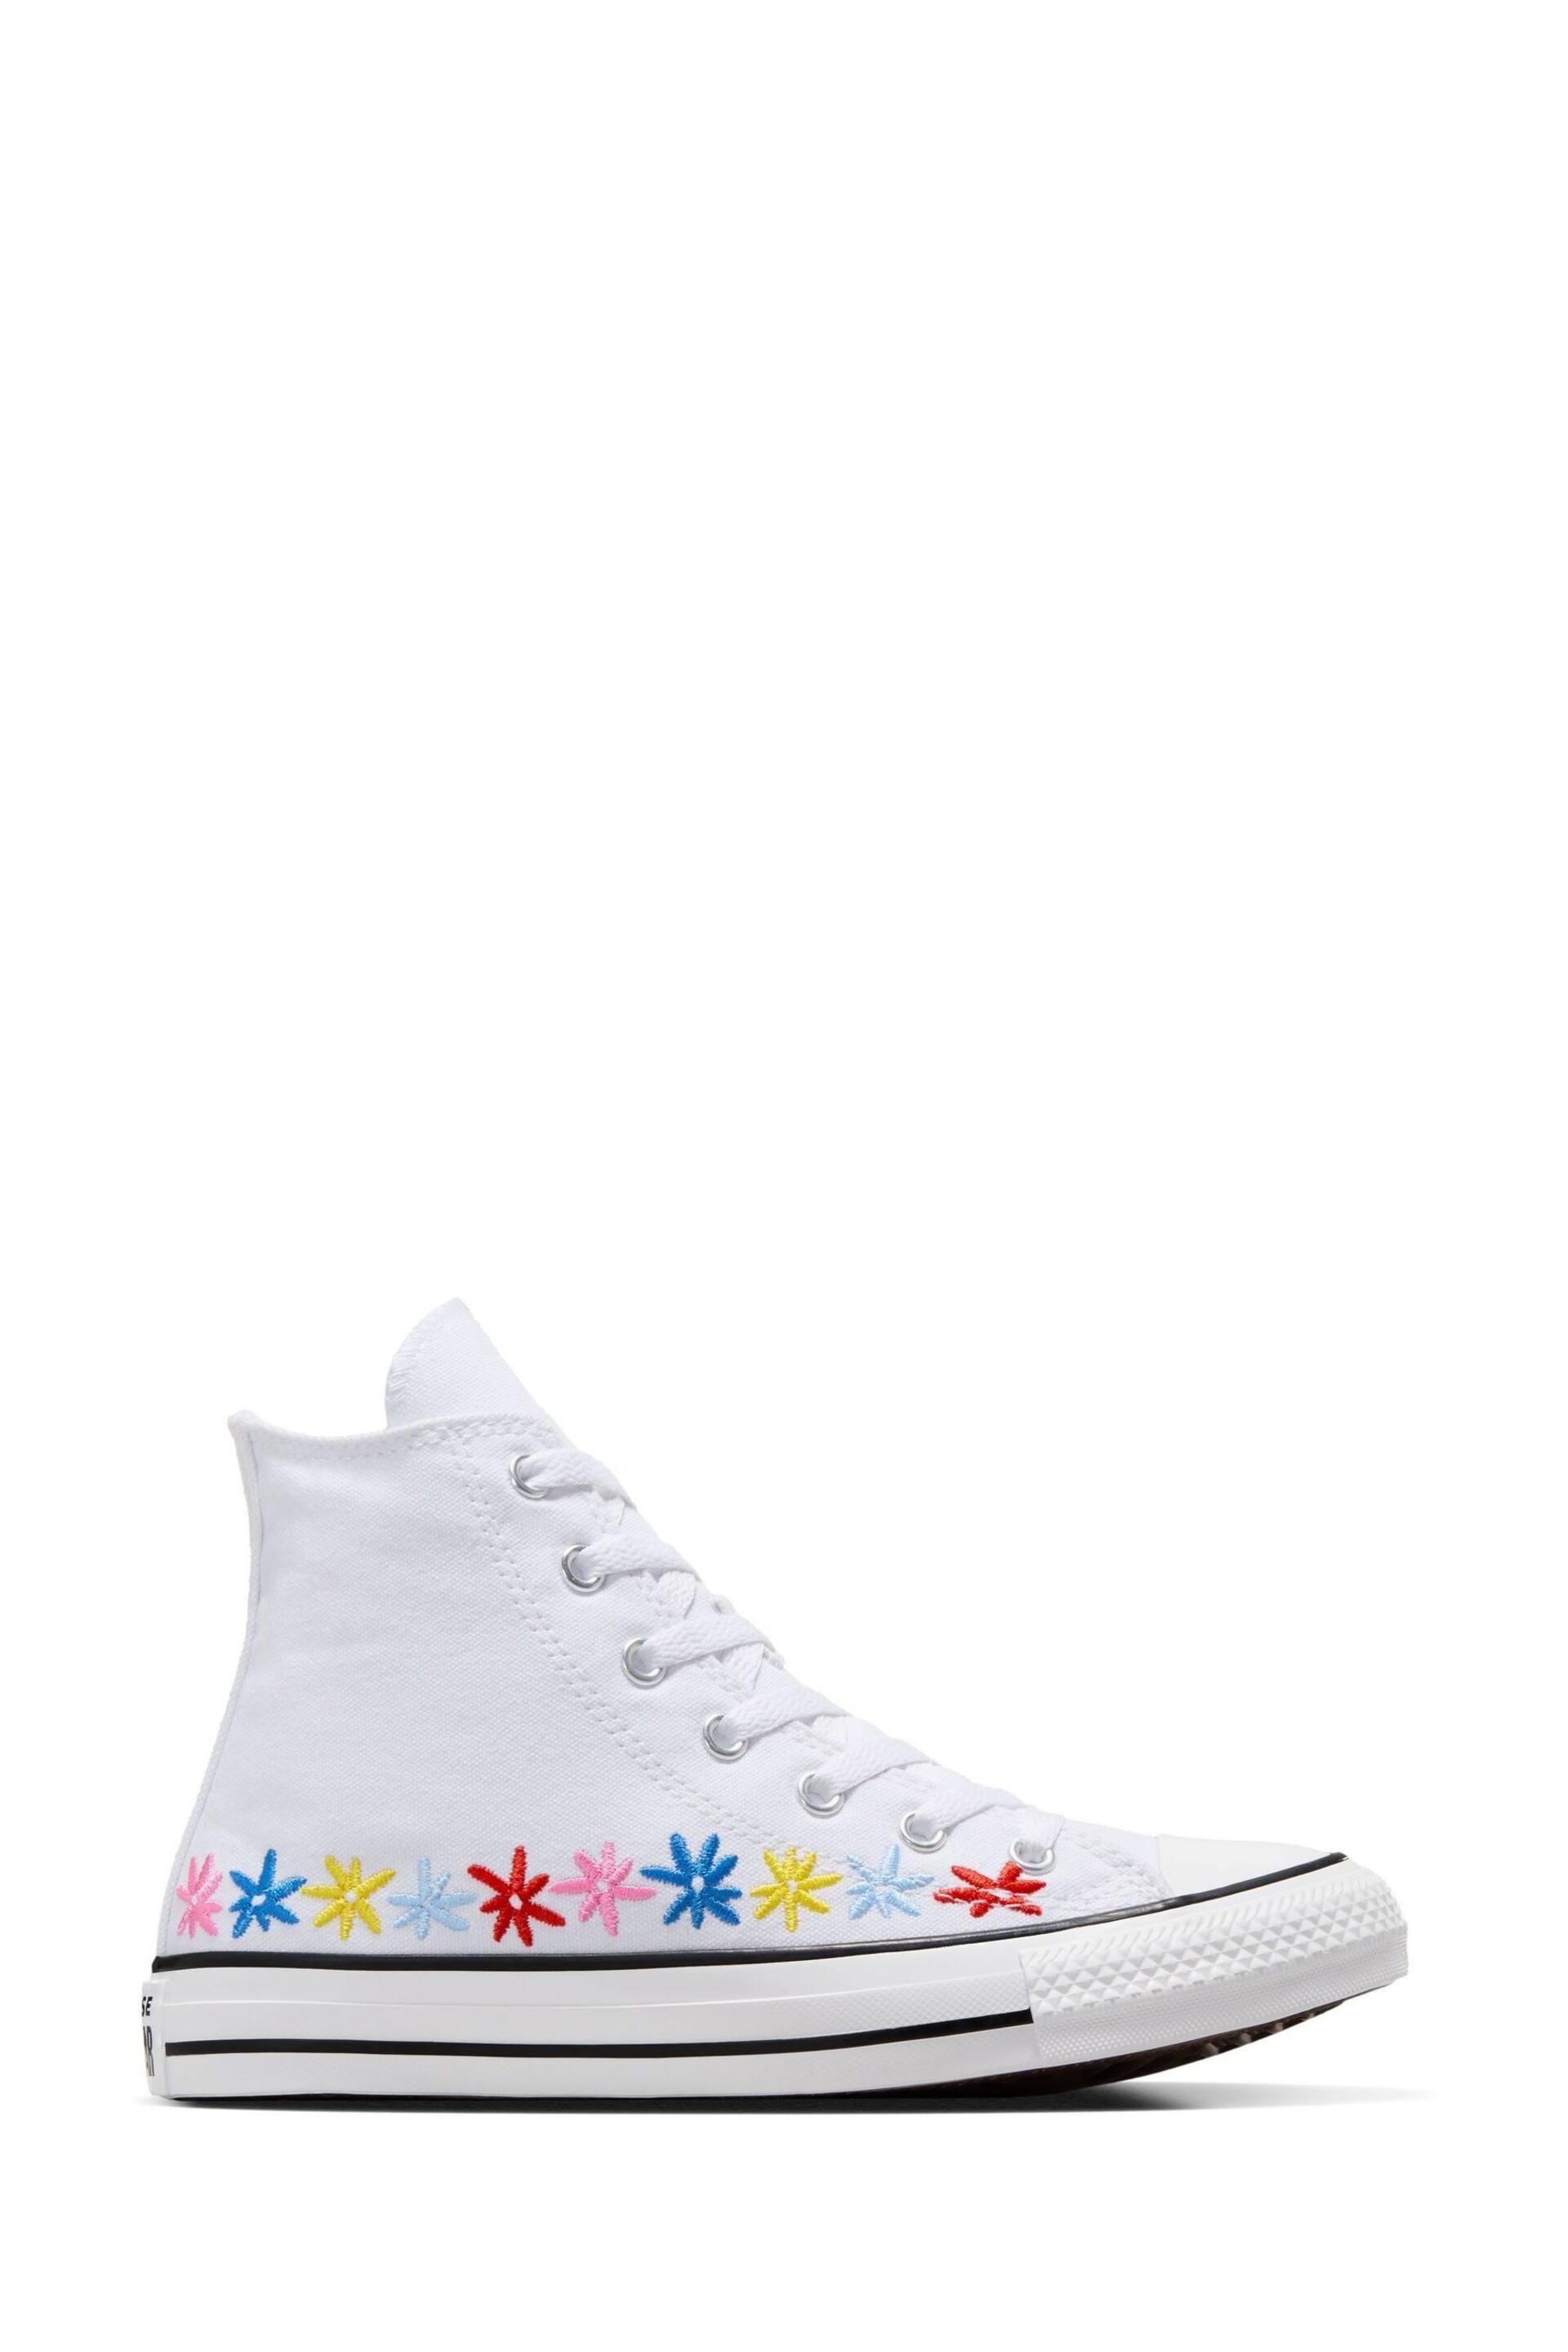 Converse White Embroidered Chuck Taylor All Star Youth Trainers - Image 6 of 9